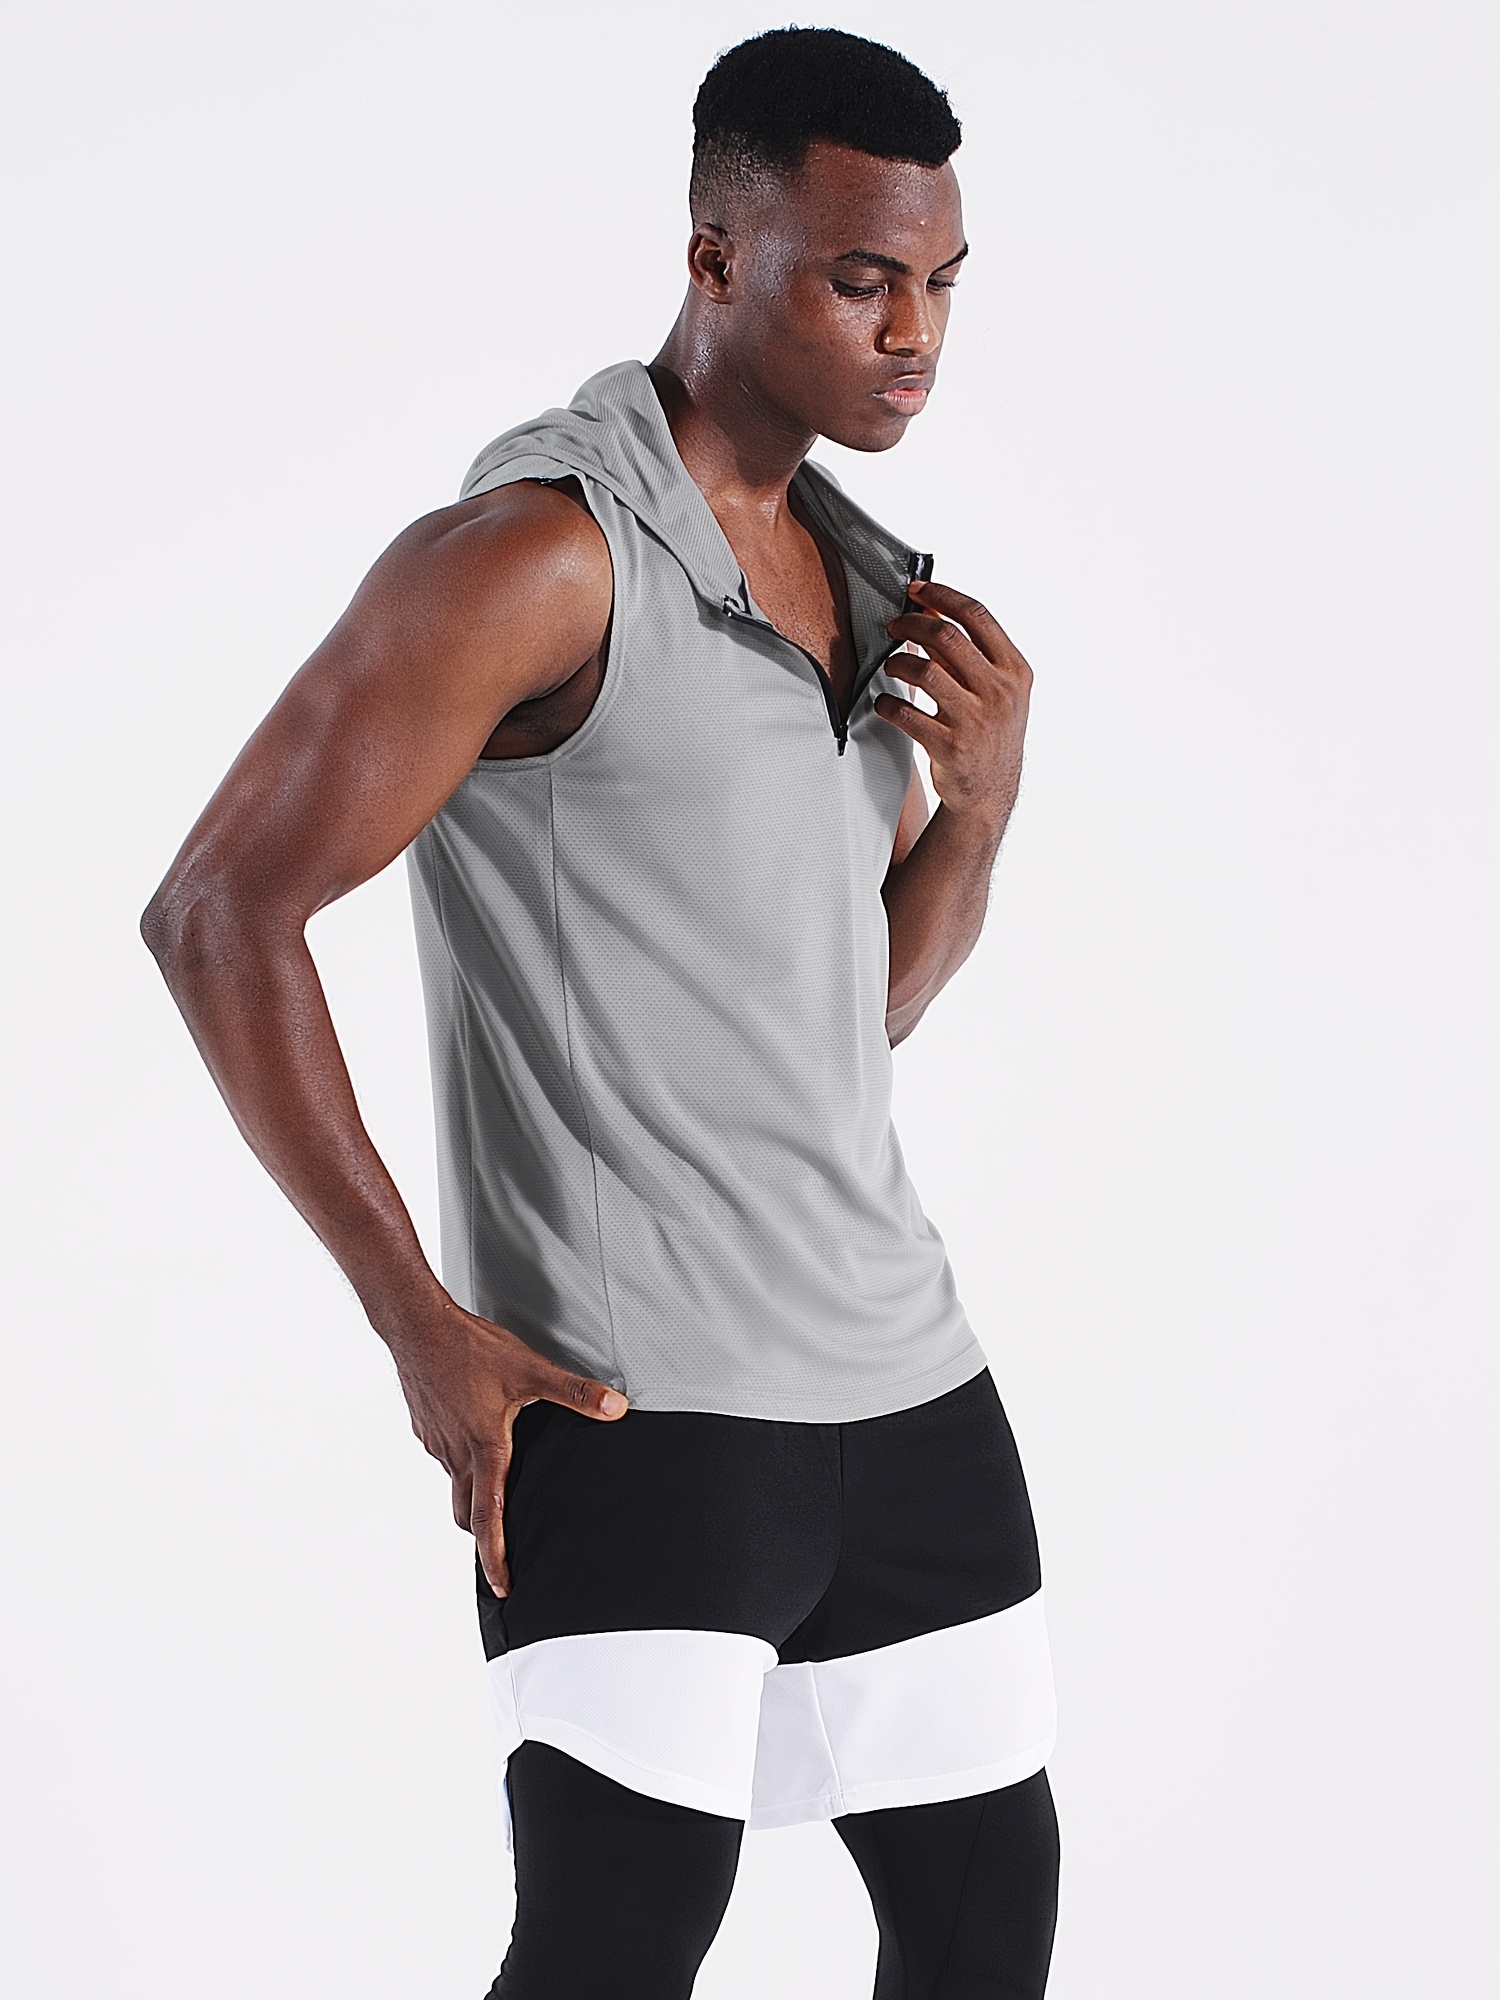 Mens Gym Fitness Muscle Vest Casual Hoodie Tank Tops Sleeveless Pullover  T-Shirt 